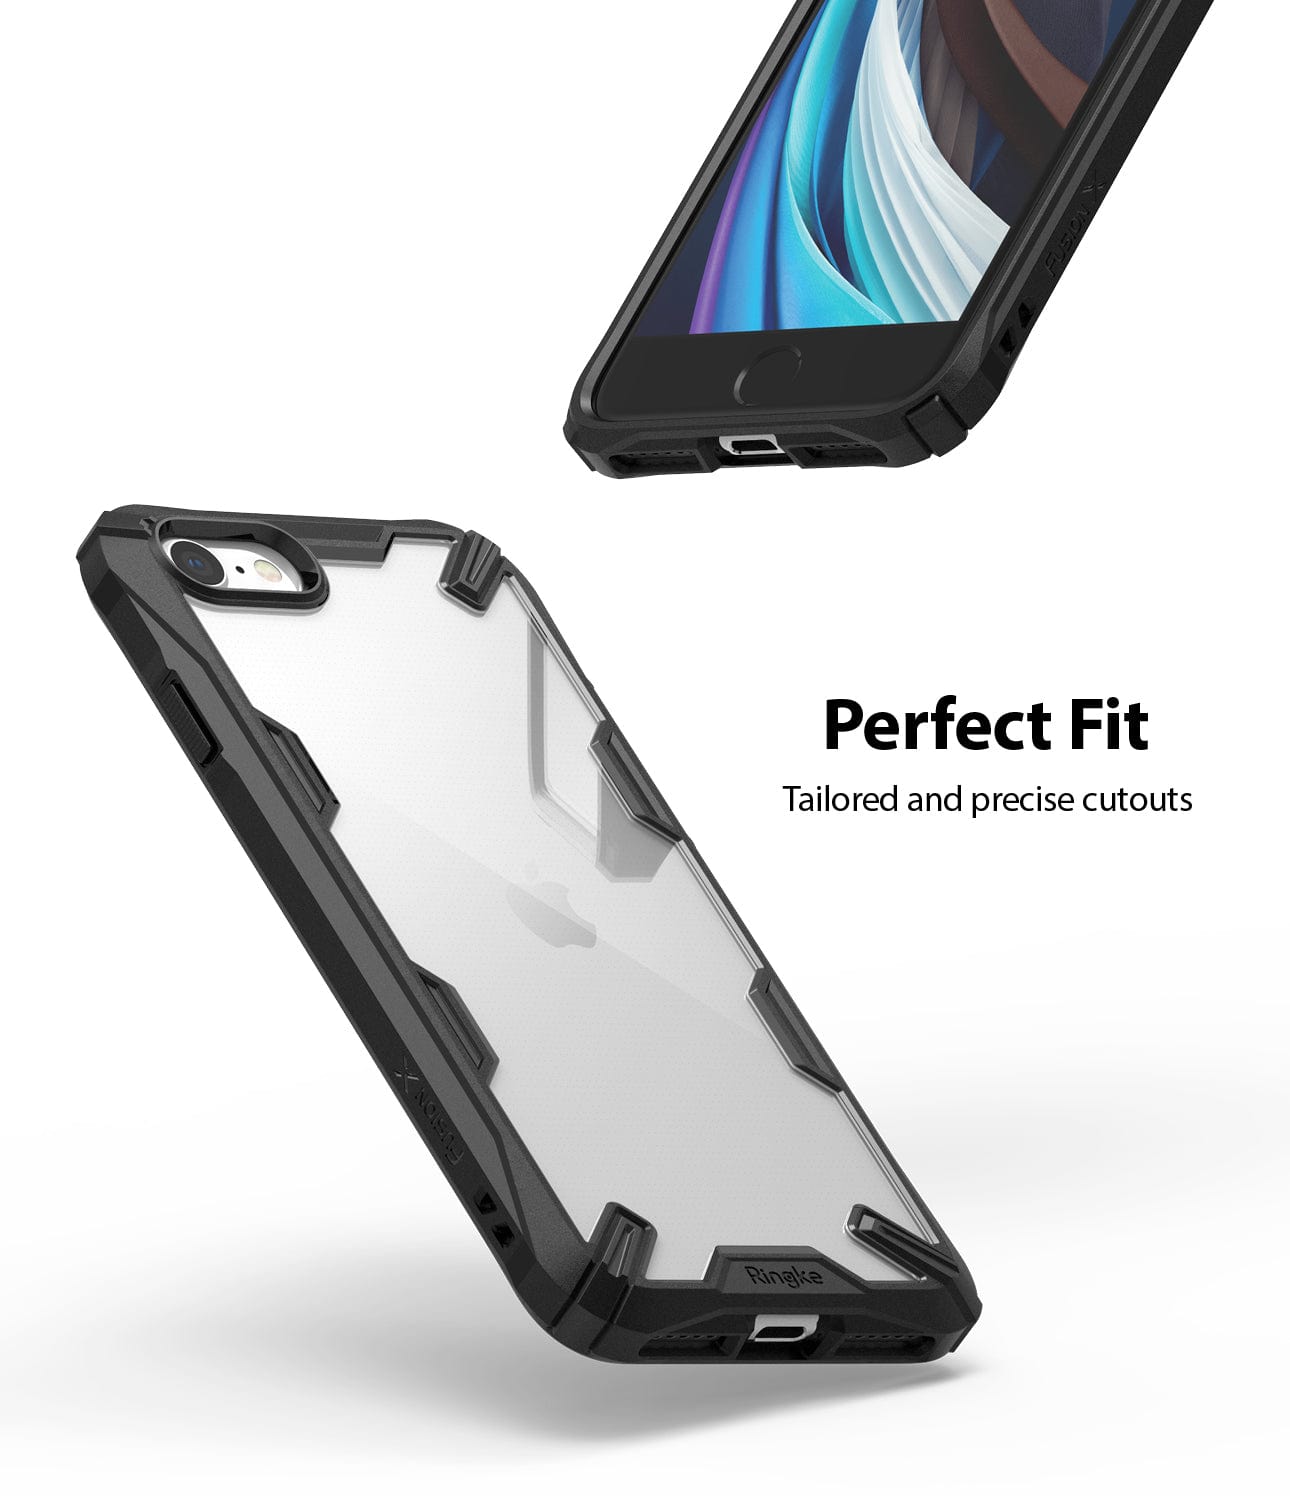 Our case is compatible with a wide range of screen protectors, including tempered glass and PET film.